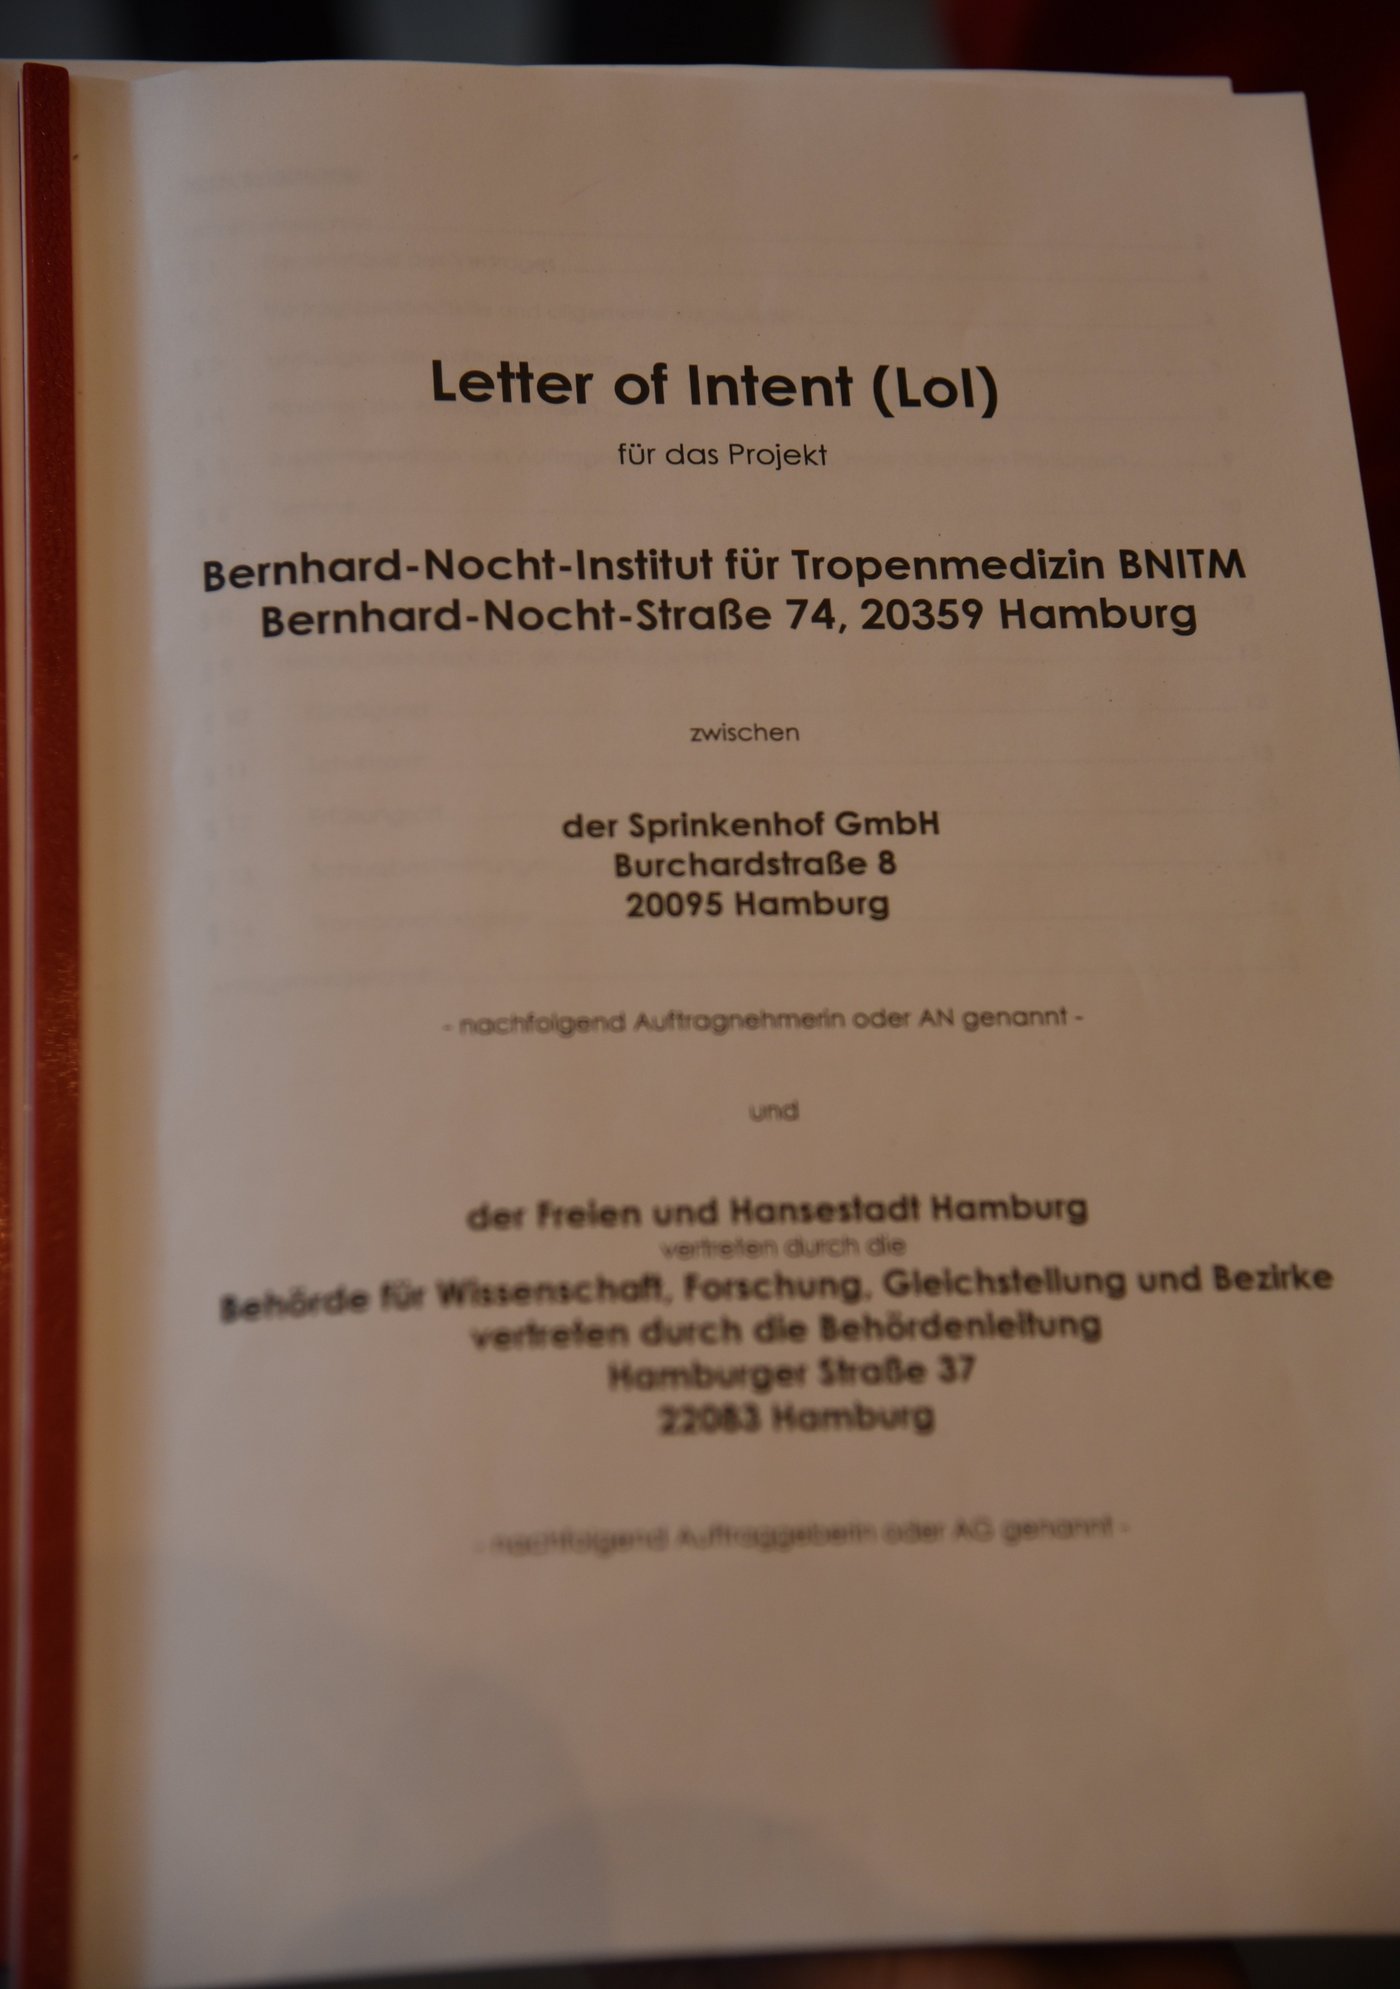 The picture shows the cover sheet of the LOI with the inscription "Letter of Intent for the Bernhard Nocht Institute for Tropical Medicine Project".